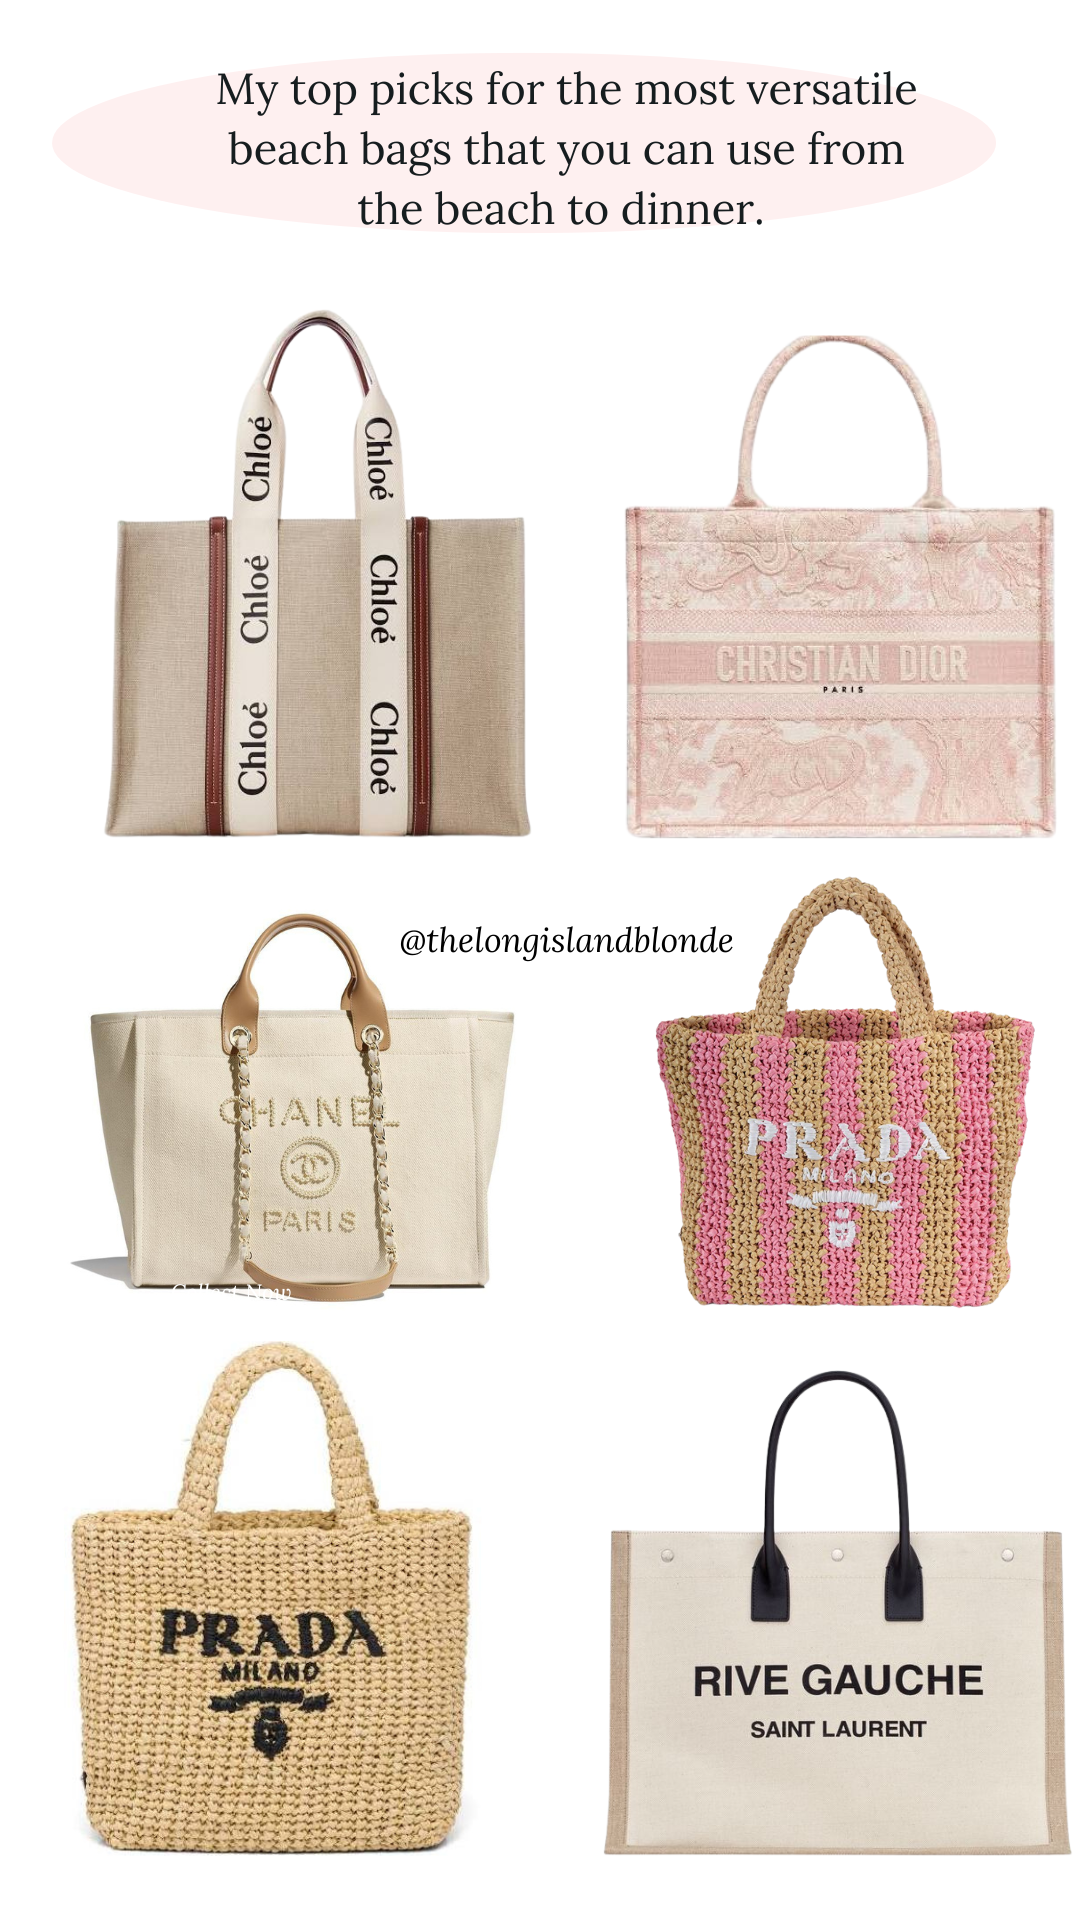 My fave beach bags to take from the beach to dinner. Summer after summer!